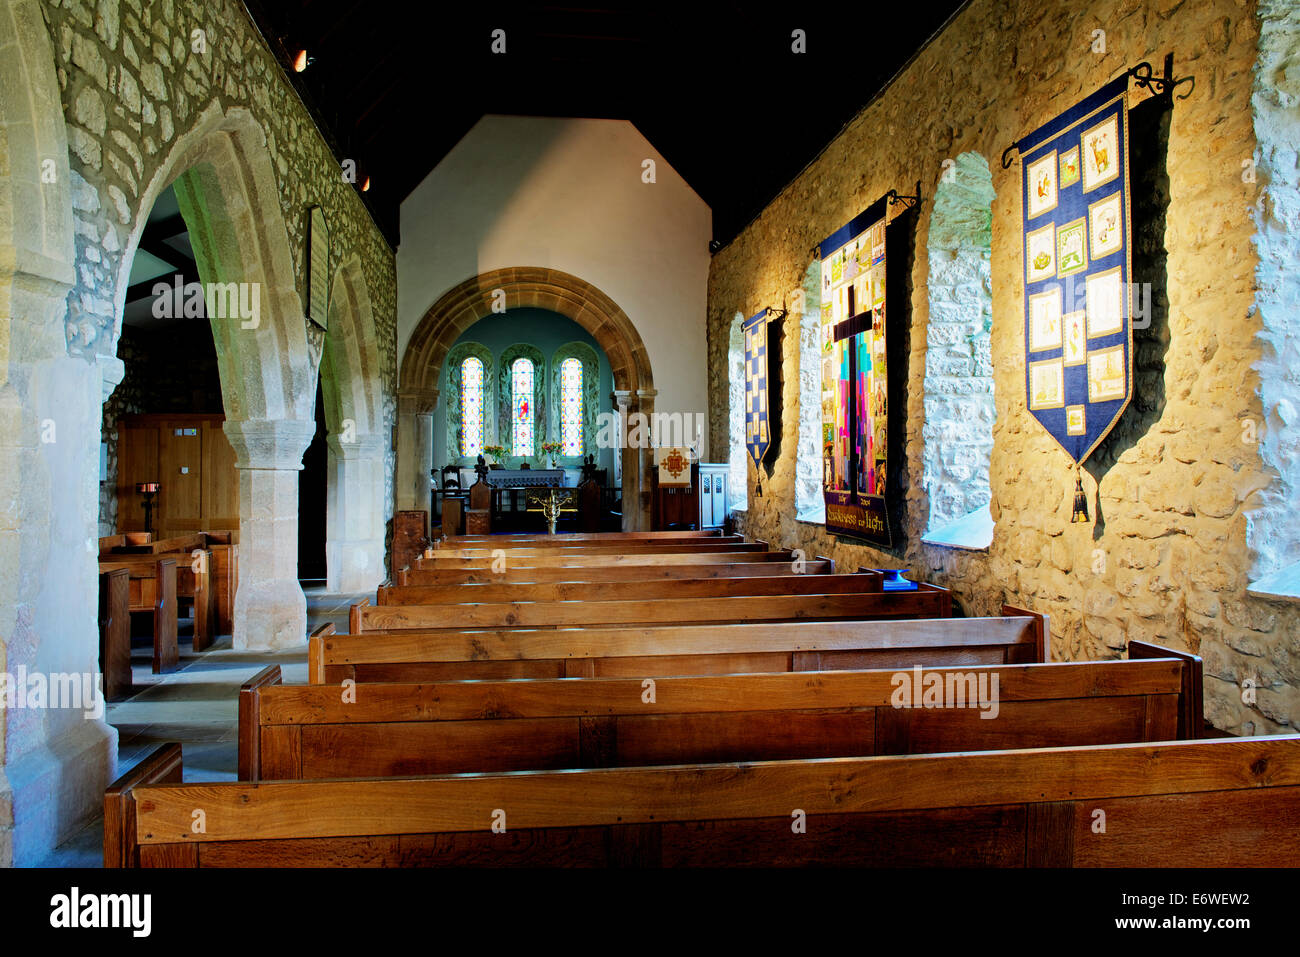 Interior of St Mary's Church, Conistone, Wharfedale, Yorkshire Dales National Park, North Yorkshire, England UK Stock Photo